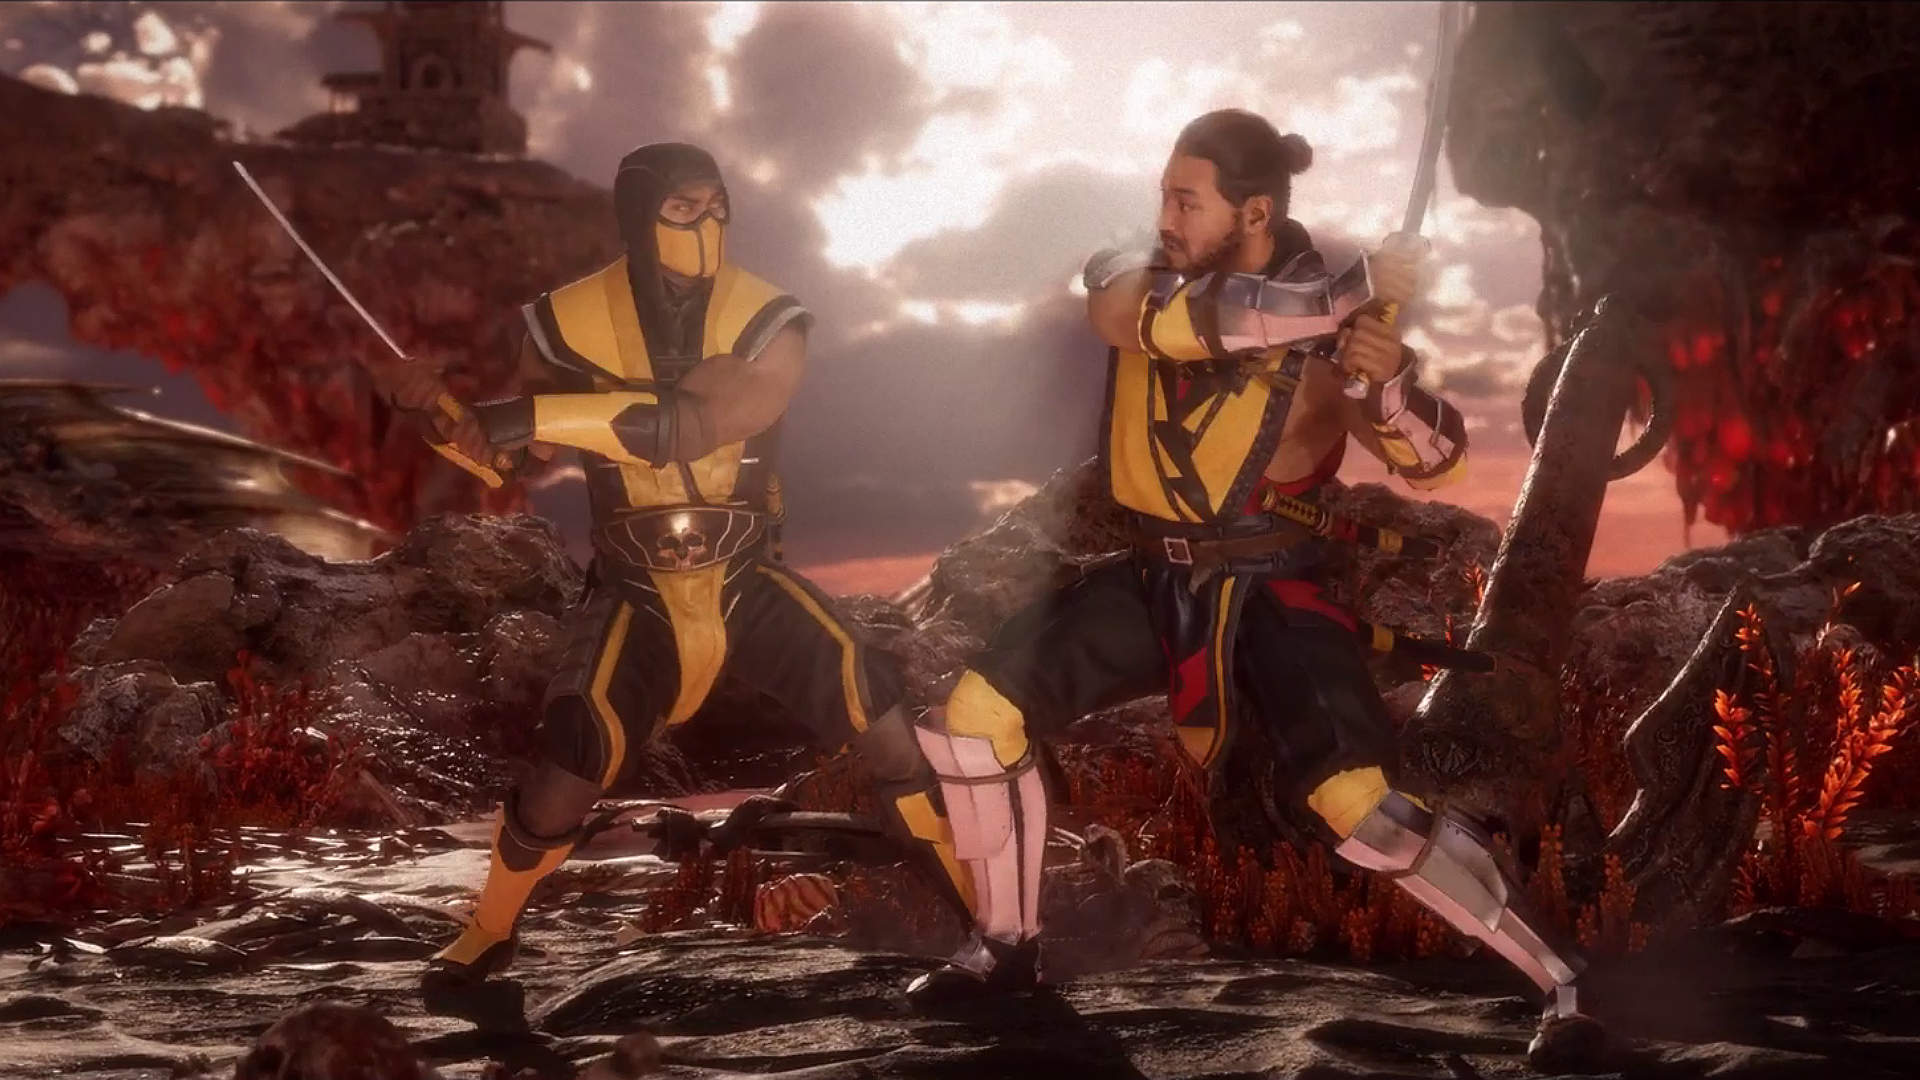 "Mortal Kombat 11" characters gear up for a fight in the mother of all gory video games.